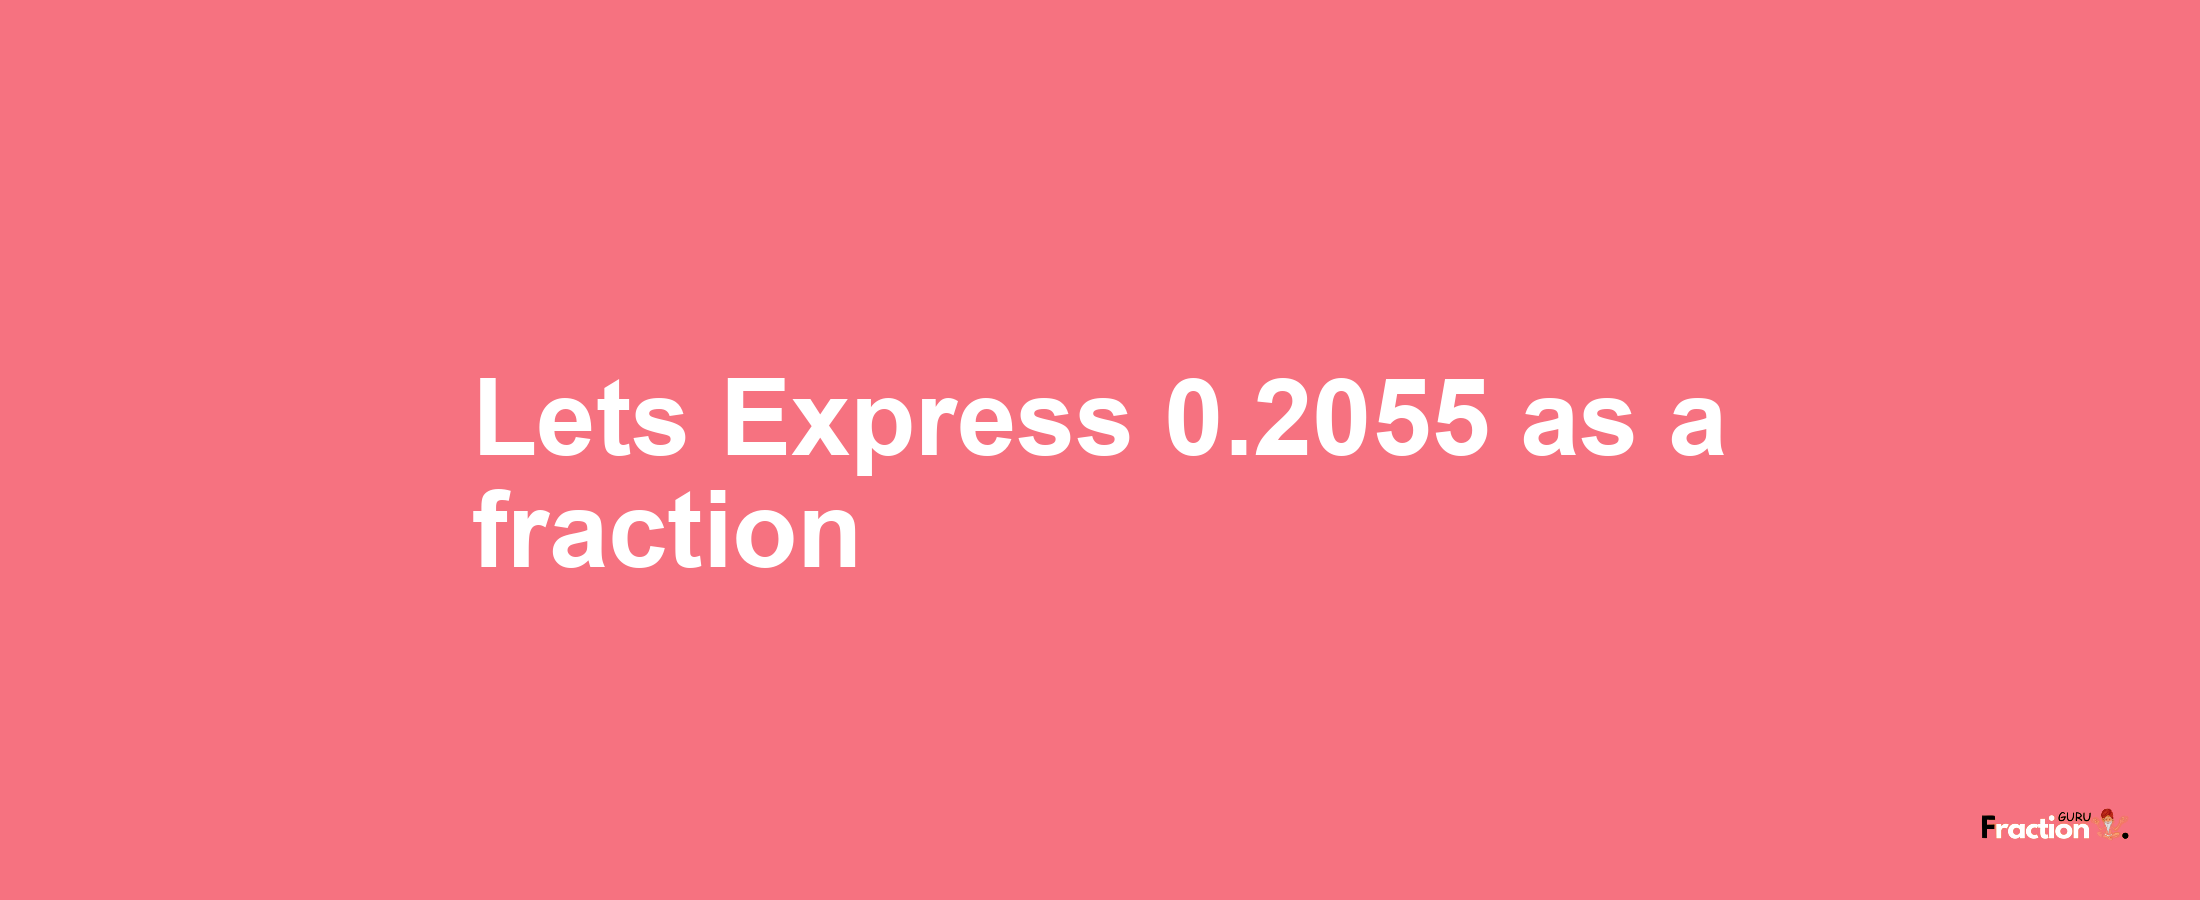 Lets Express 0.2055 as afraction